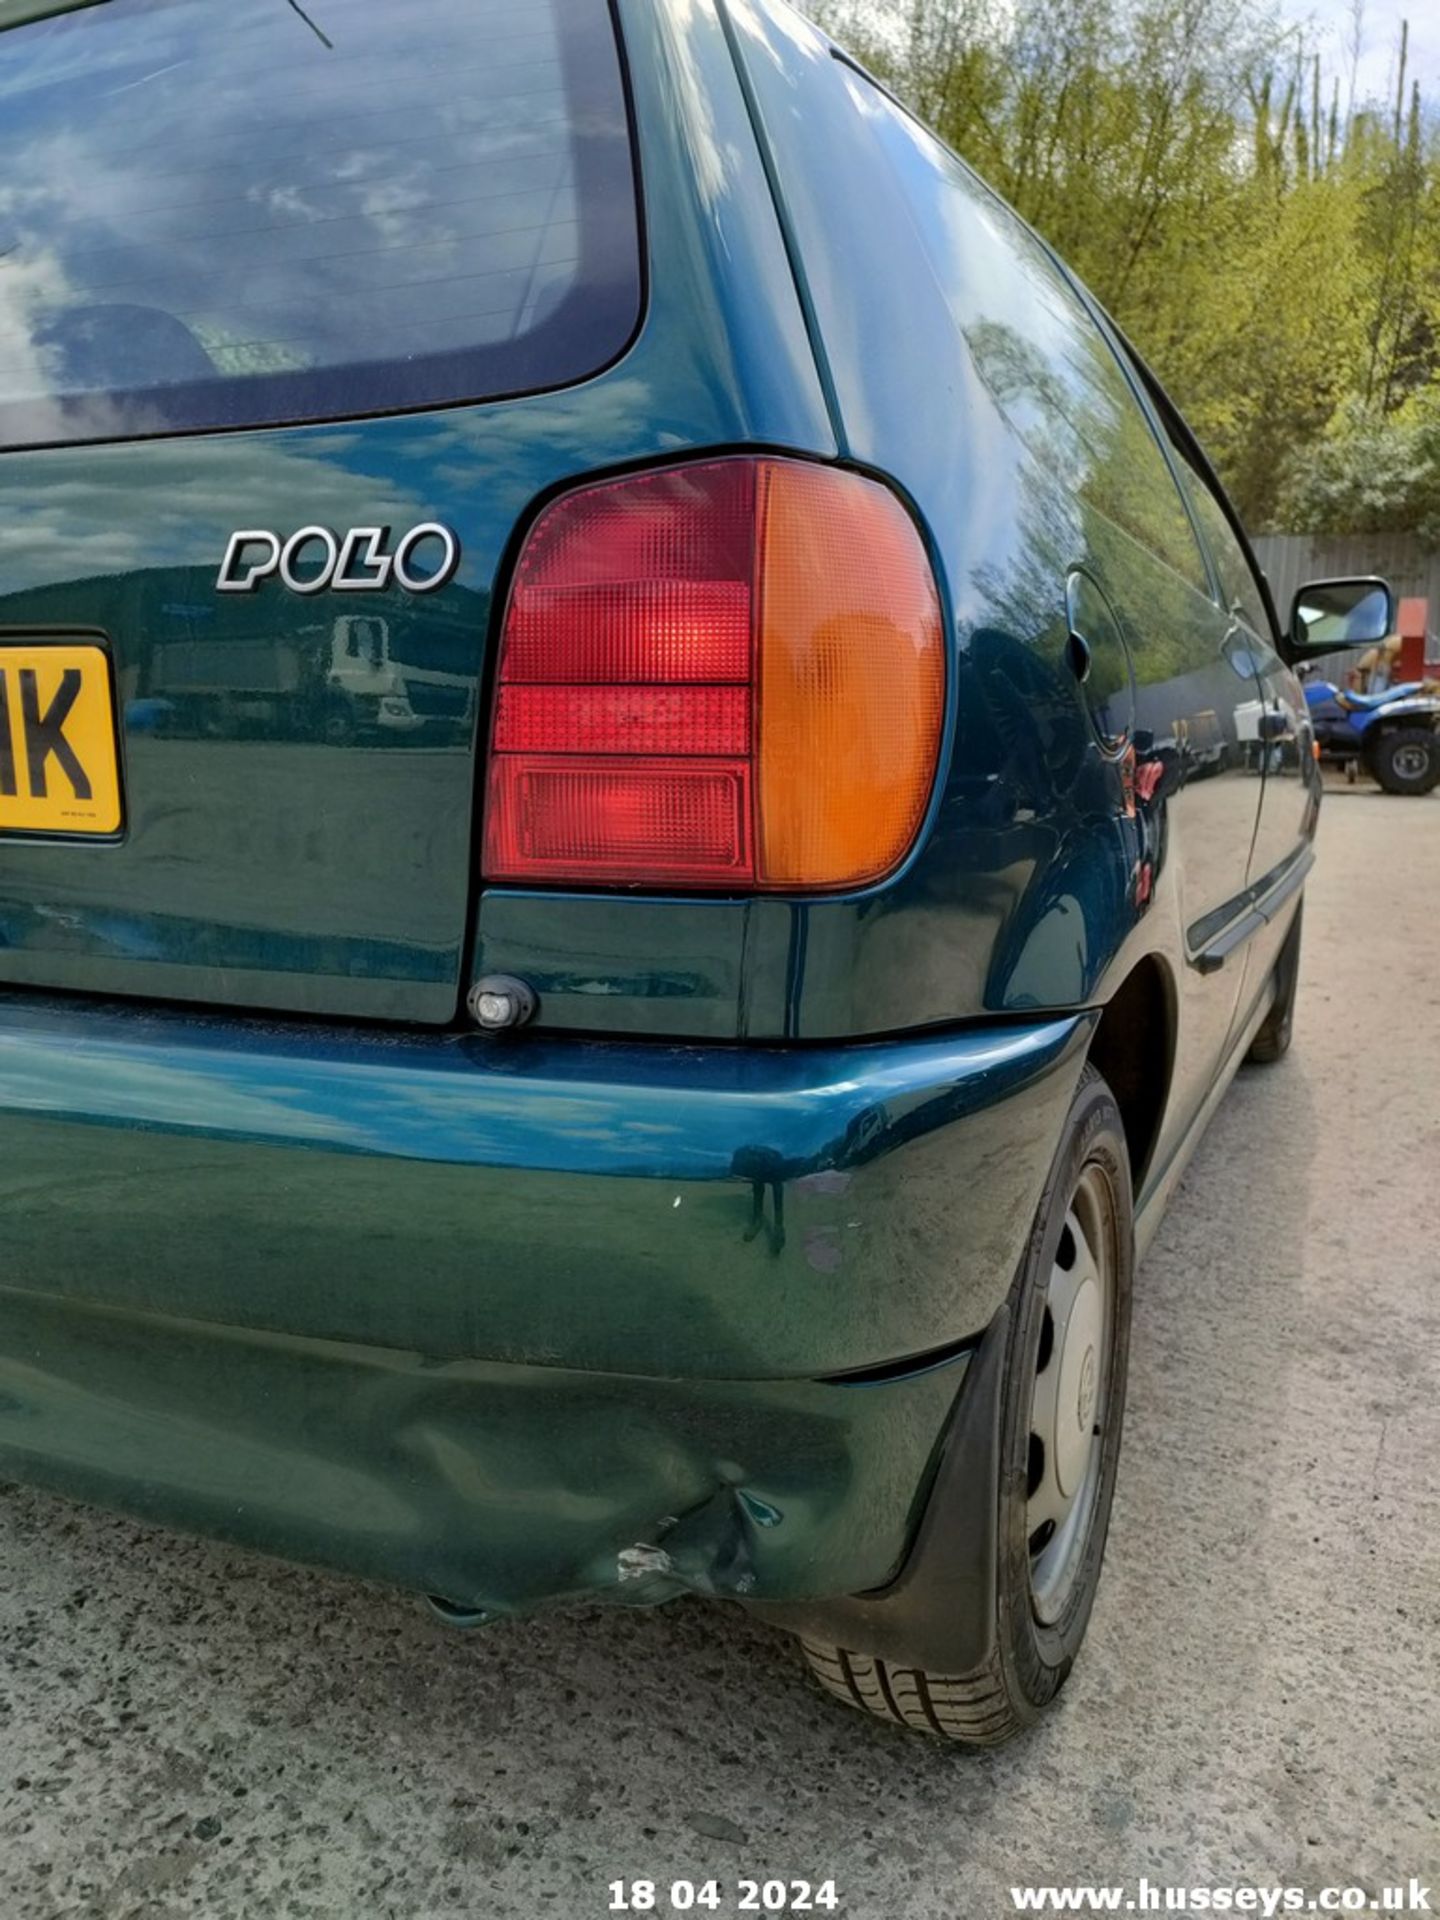 1997 VOLKSWAGEN POLO 1.4 CL AUTO - 1390cc 3dr Hatchback (Green, 68k) - Image 37 of 60